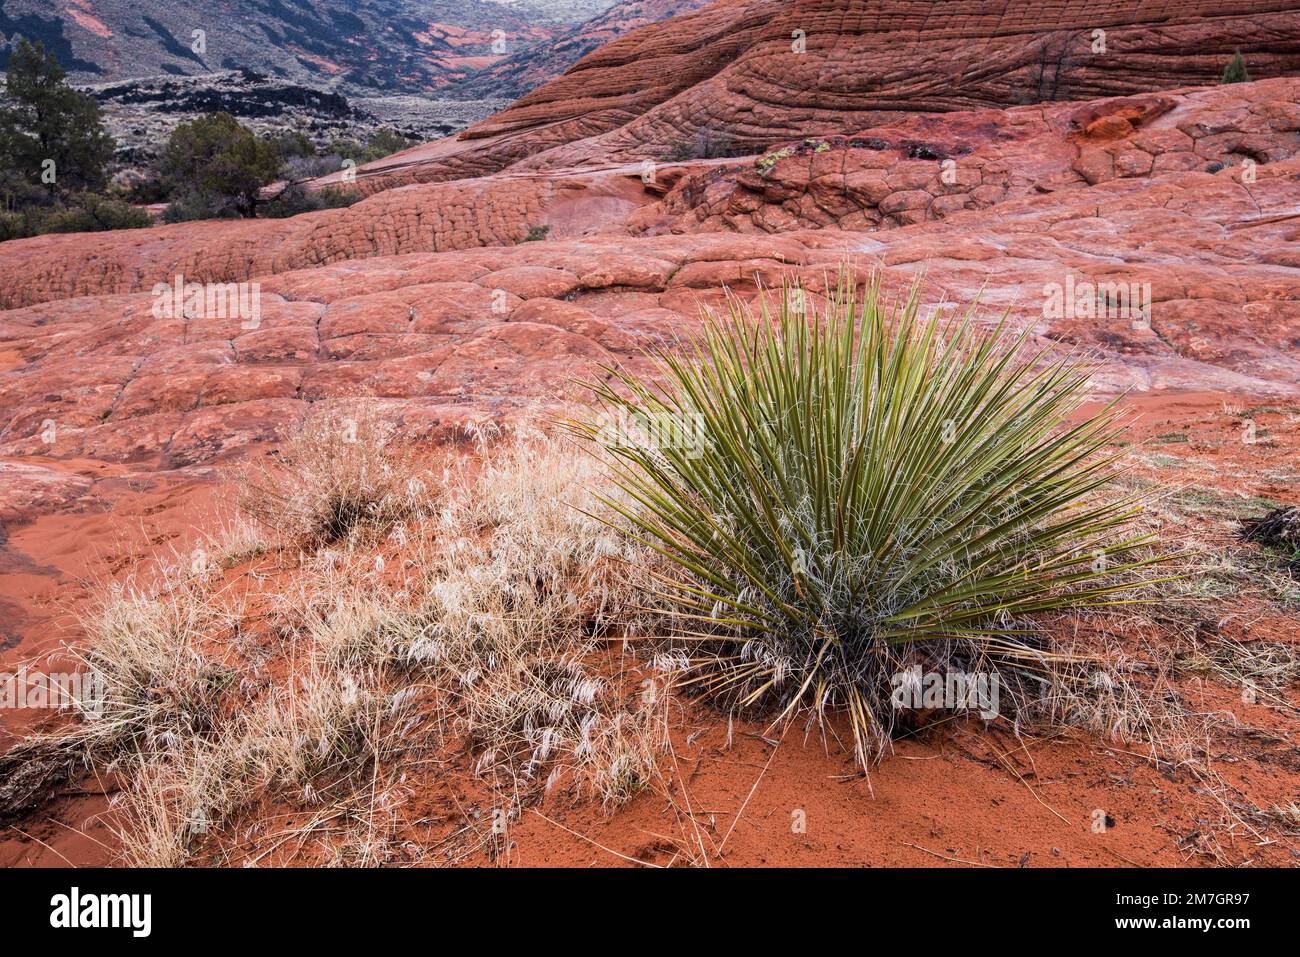 Desert plants growing in a harsh, arid arid environment inside Snow Canyon State Park, Ut. Only the hardiest plants can survive in these conditions. Stock Photo